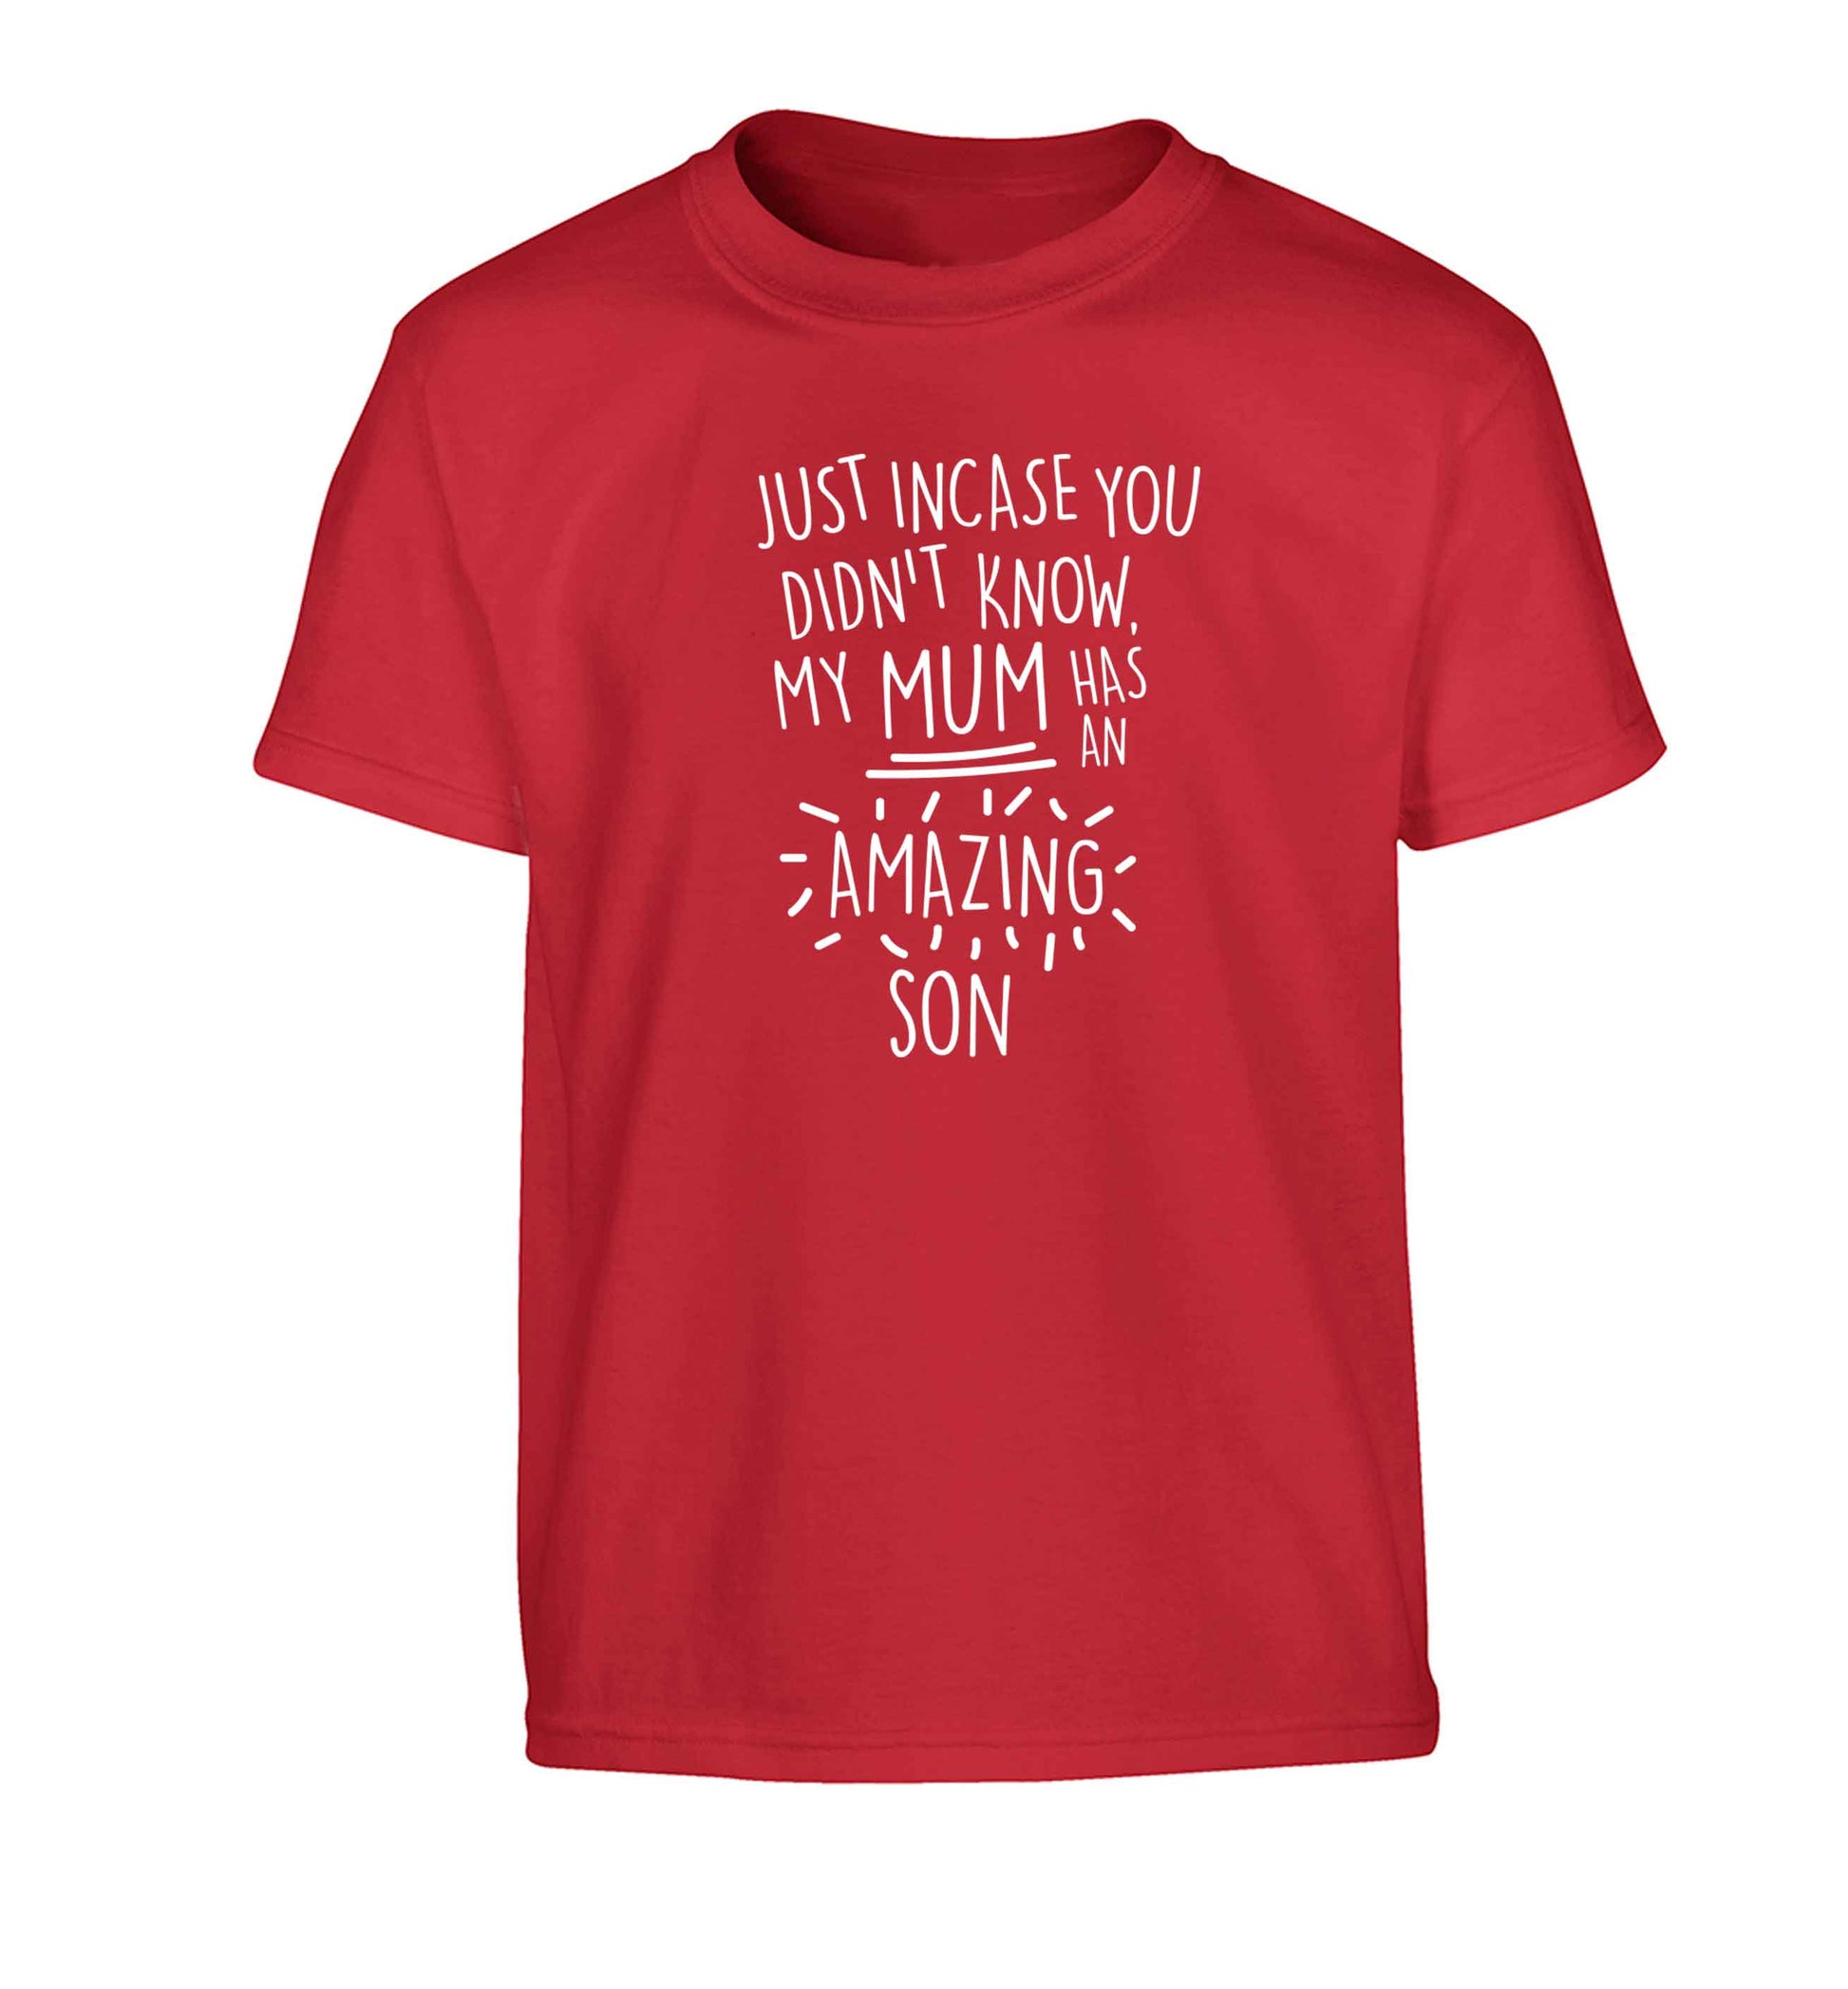 Just incase you didn't know my mum has an amazing son Children's red Tshirt 12-13 Years